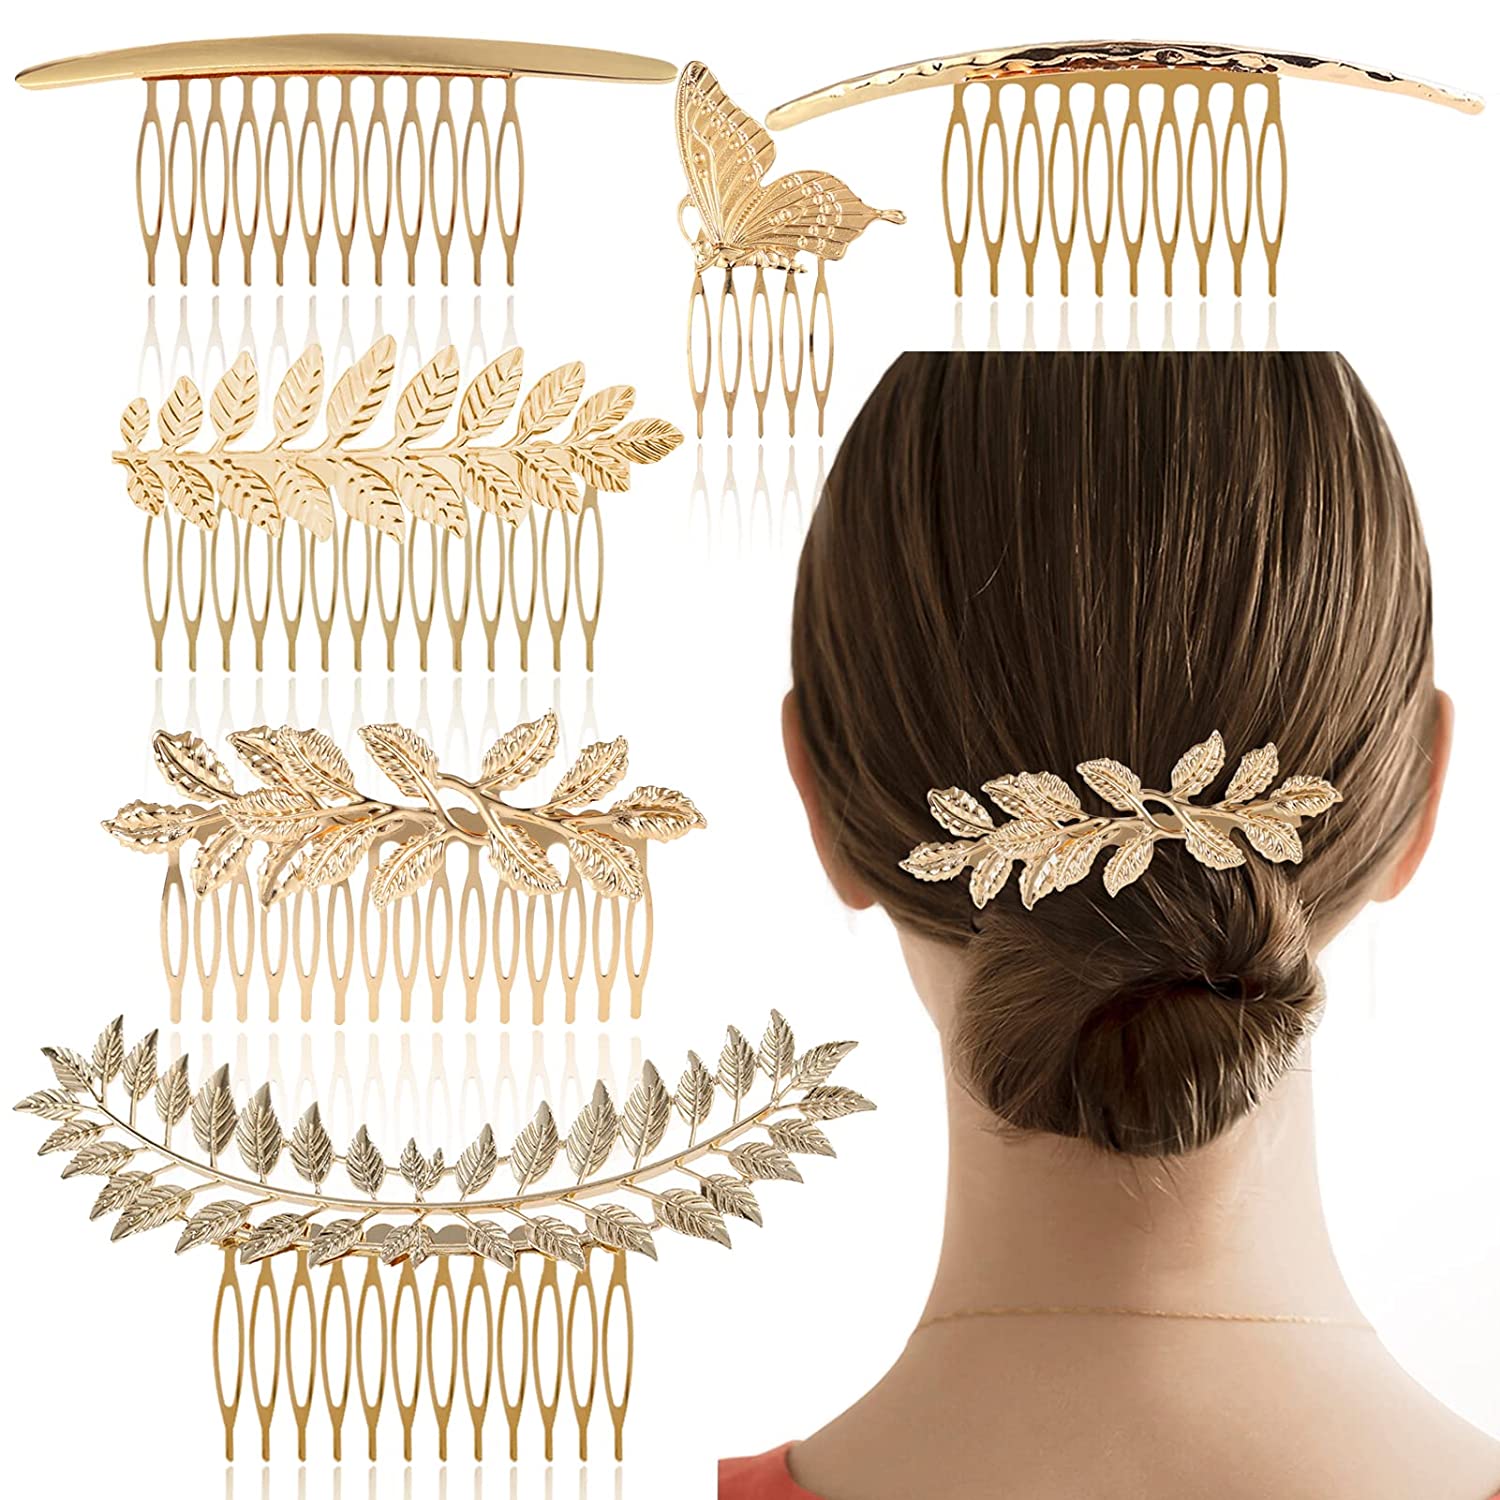 INLAZYTIM Pack of 6 Vintage Hair Side Combs Metal for Women Girls Bridal Leaf Decorative Clips Golden French Twist Hair Comb with Teeth Handle for Bride Wedding Headpiece Hair Accessories